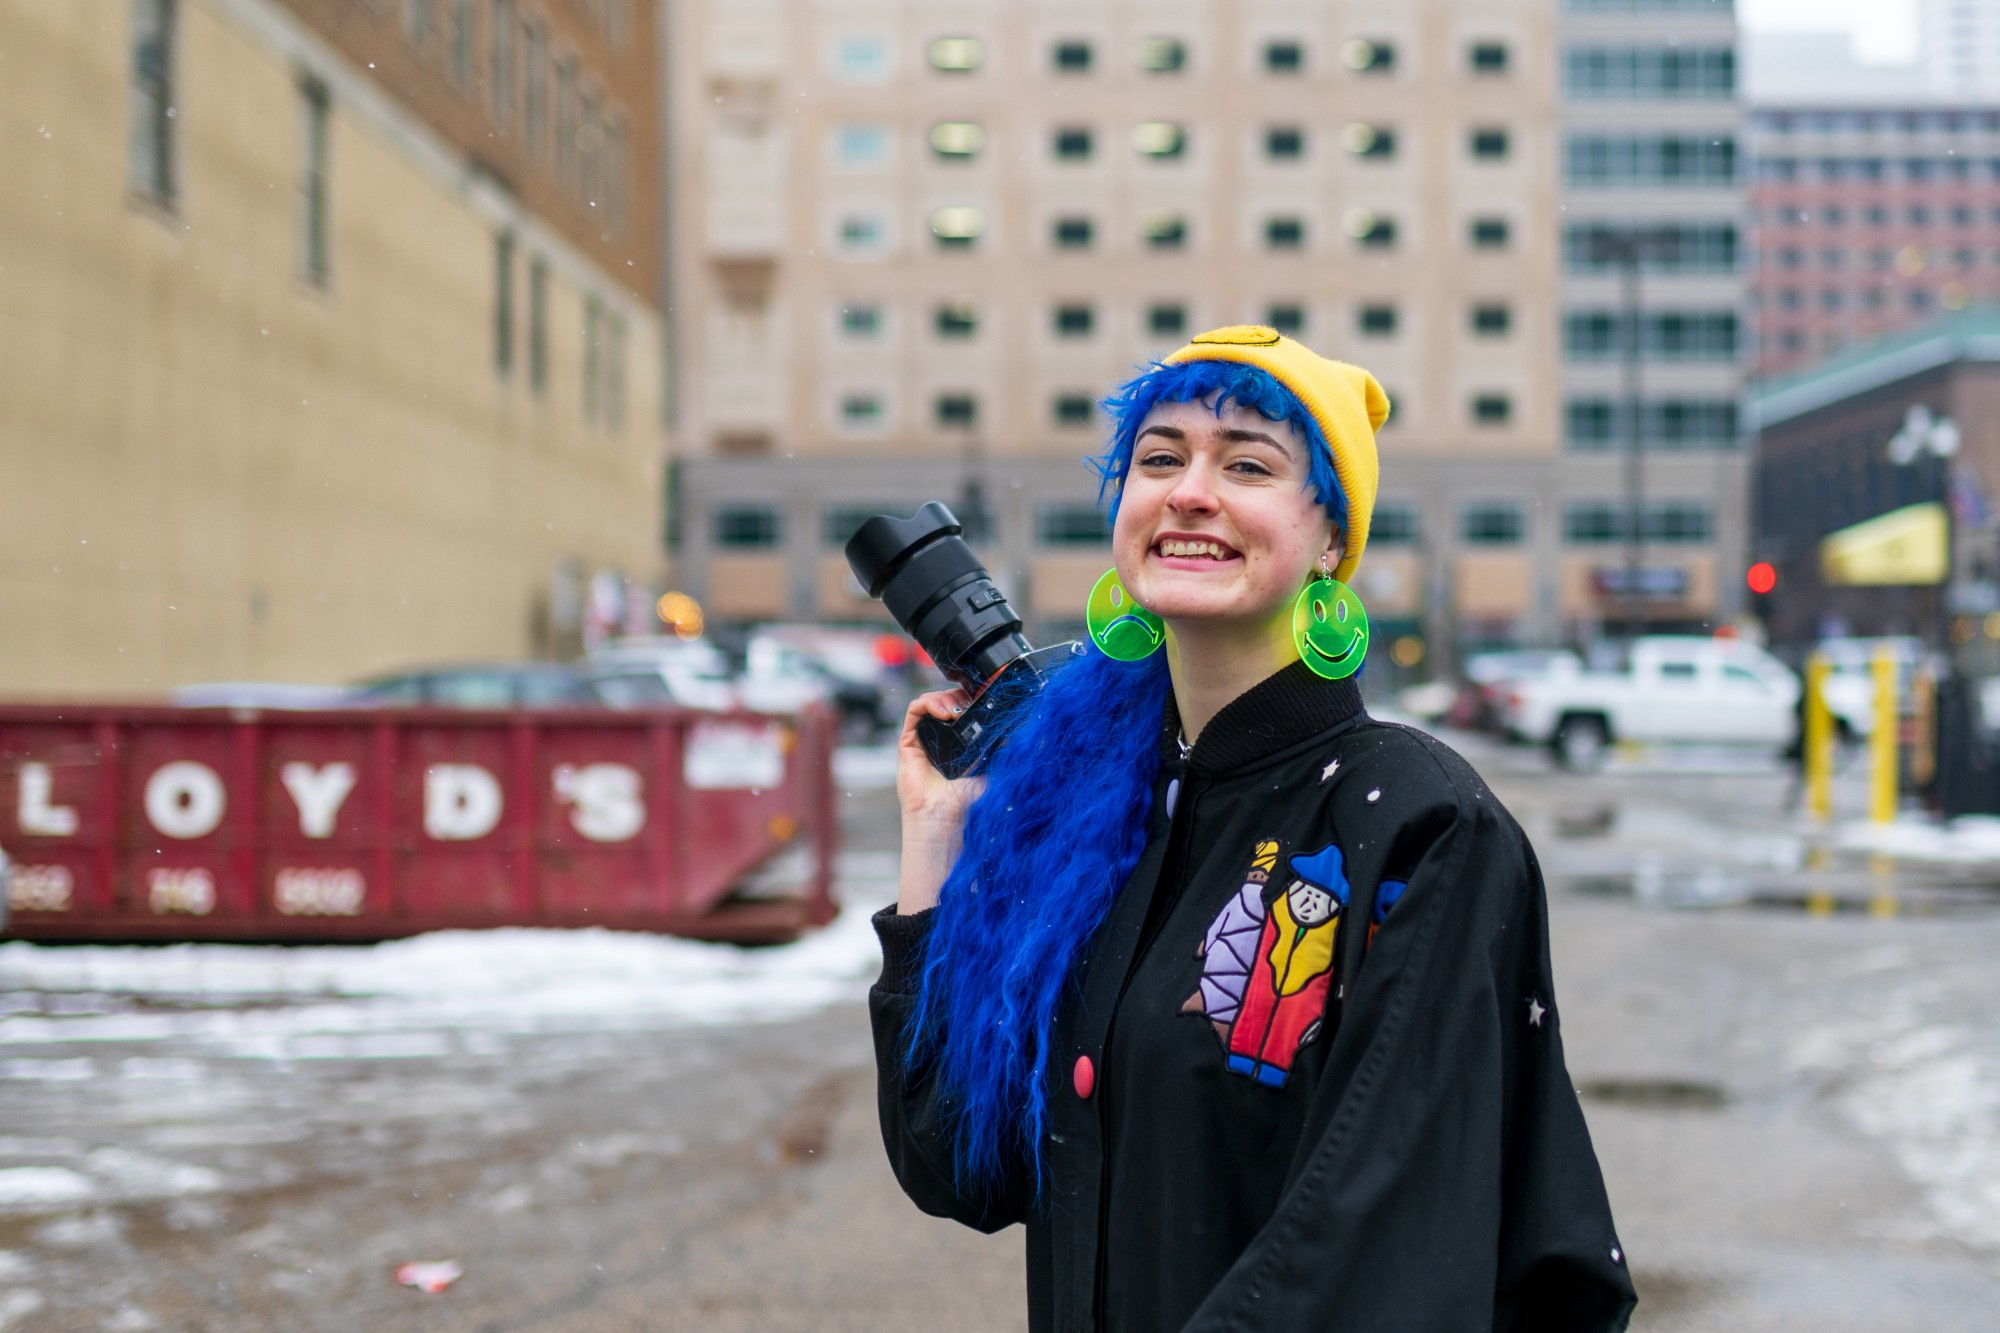 University of Minnesota Student and Social Media Influencer Bri Flasch poses for a portrait in Downtown Minneapolis on Friday, Jan. 24. Bri seeks to inspire others through her social media presence, promoting freedom of expression through her hashtags #DoEverythingYouLove and #WearWhateverYouWant.